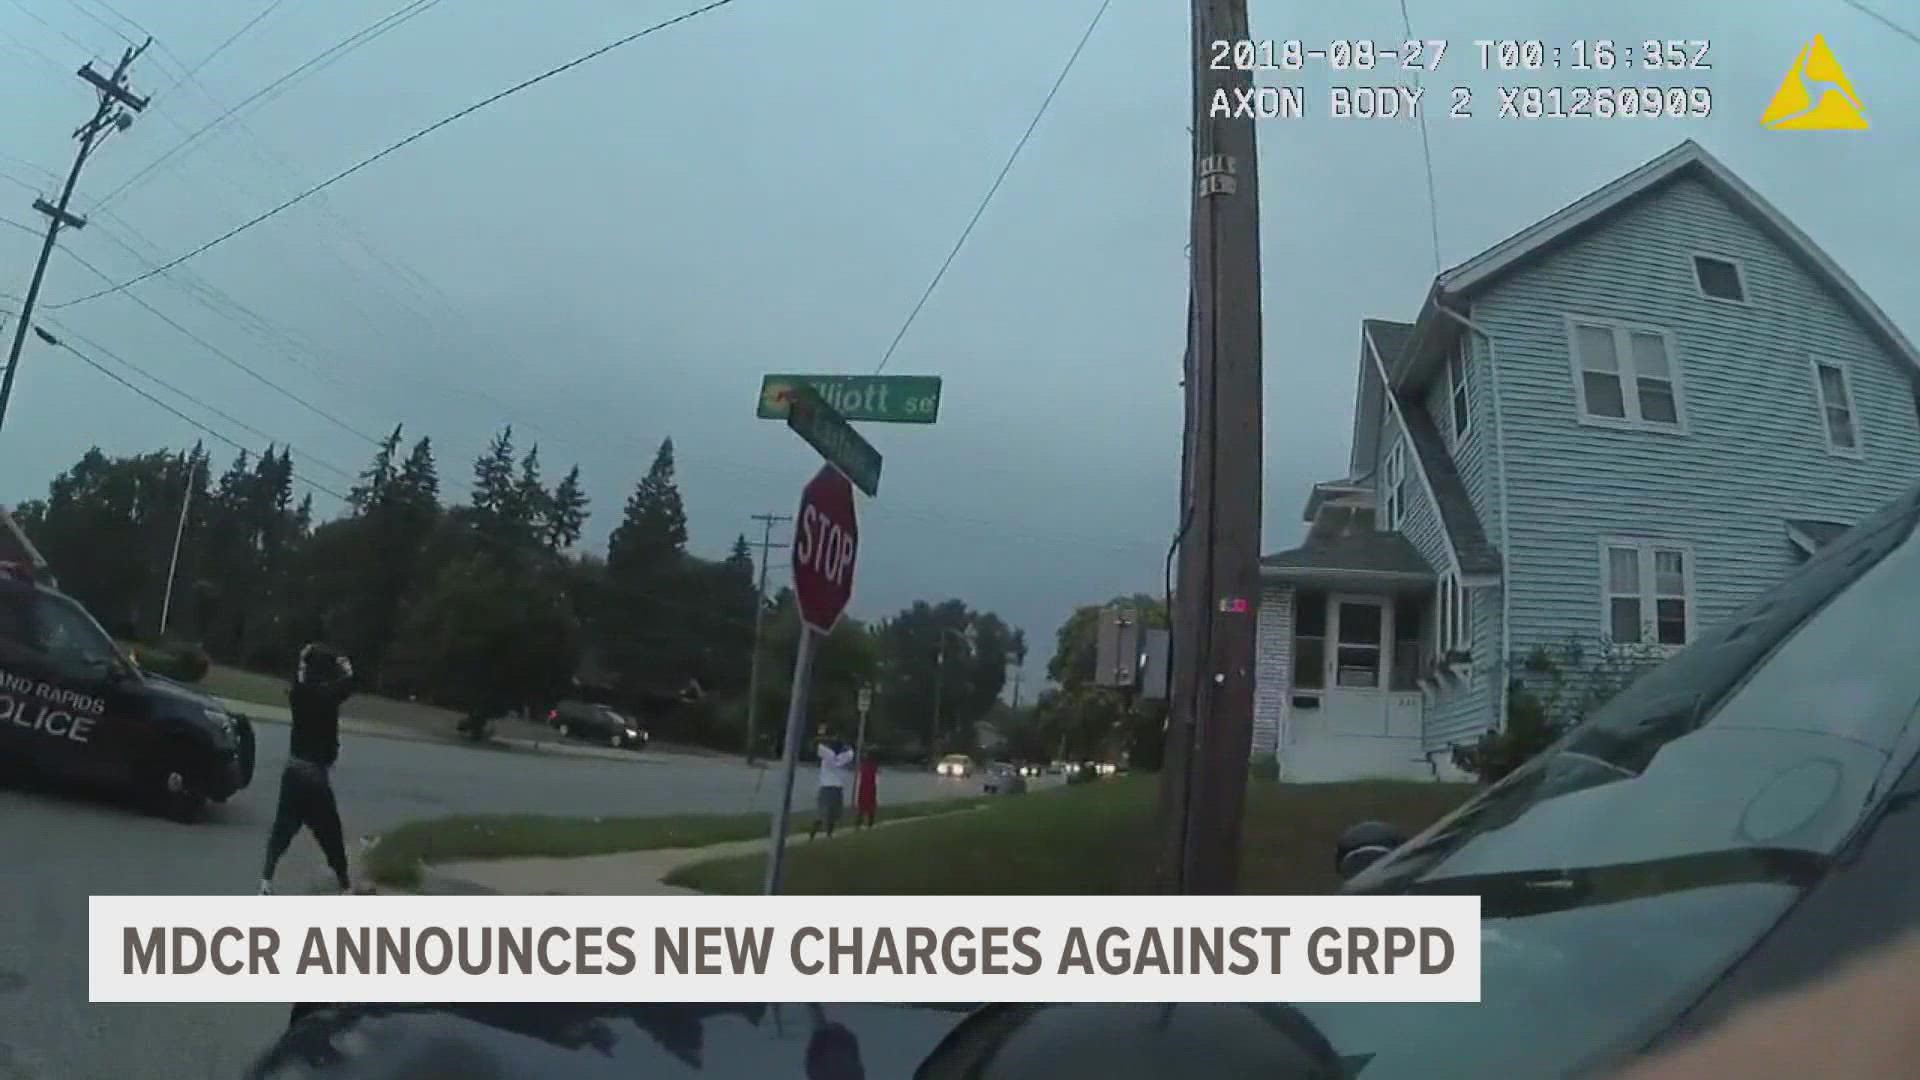 The charges stem from an interaction with two Black children in 2018 where officers held them at gunpoint.